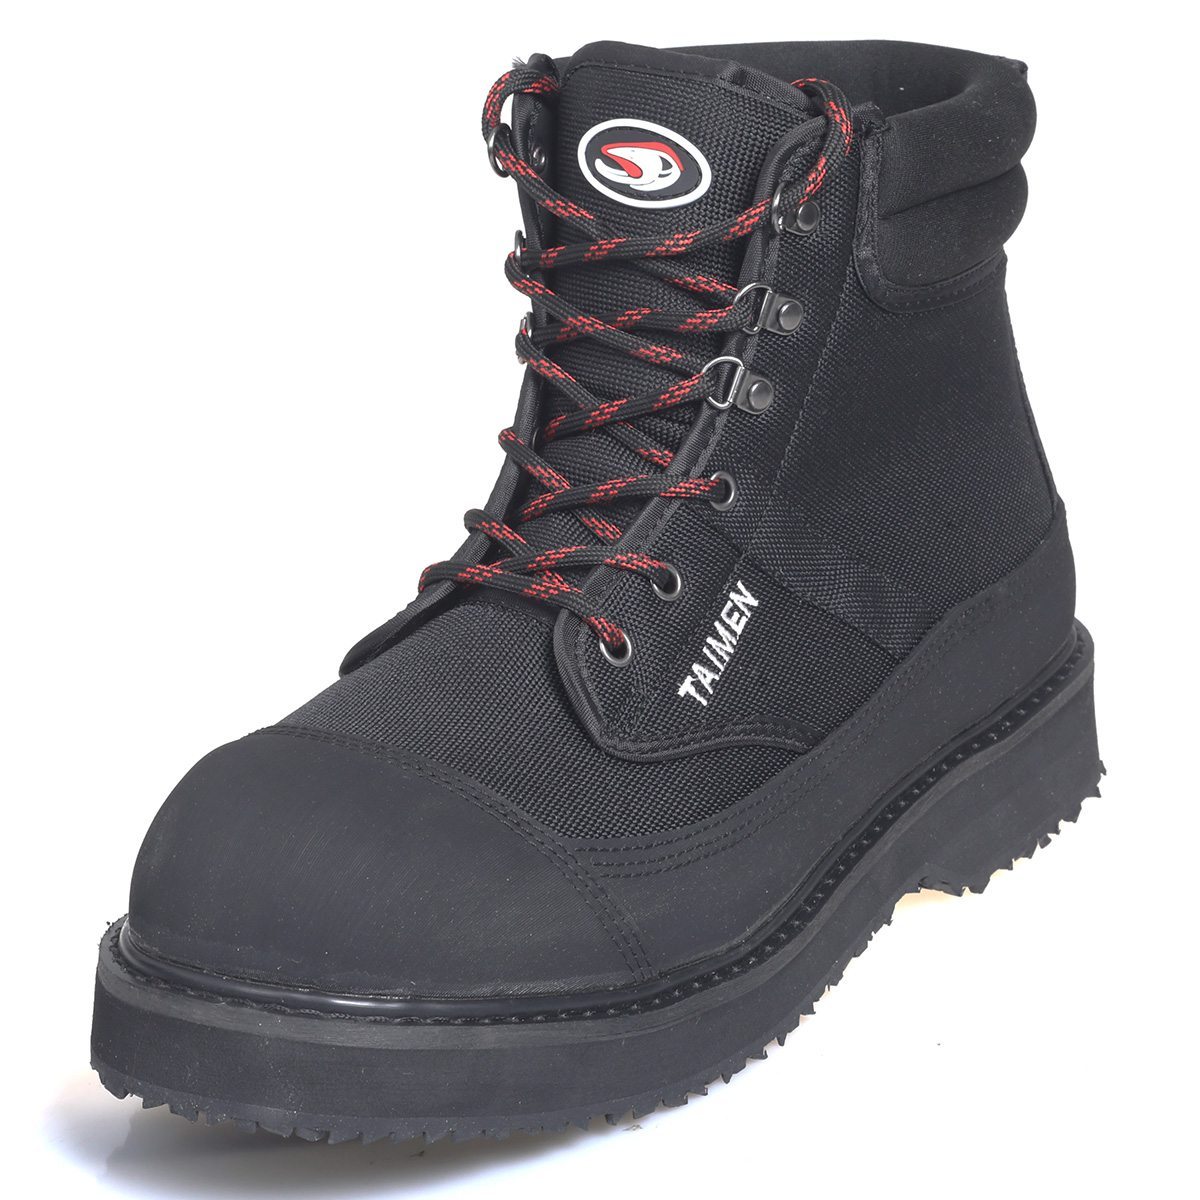 Taimen STX Wading Boots Rubber Sole